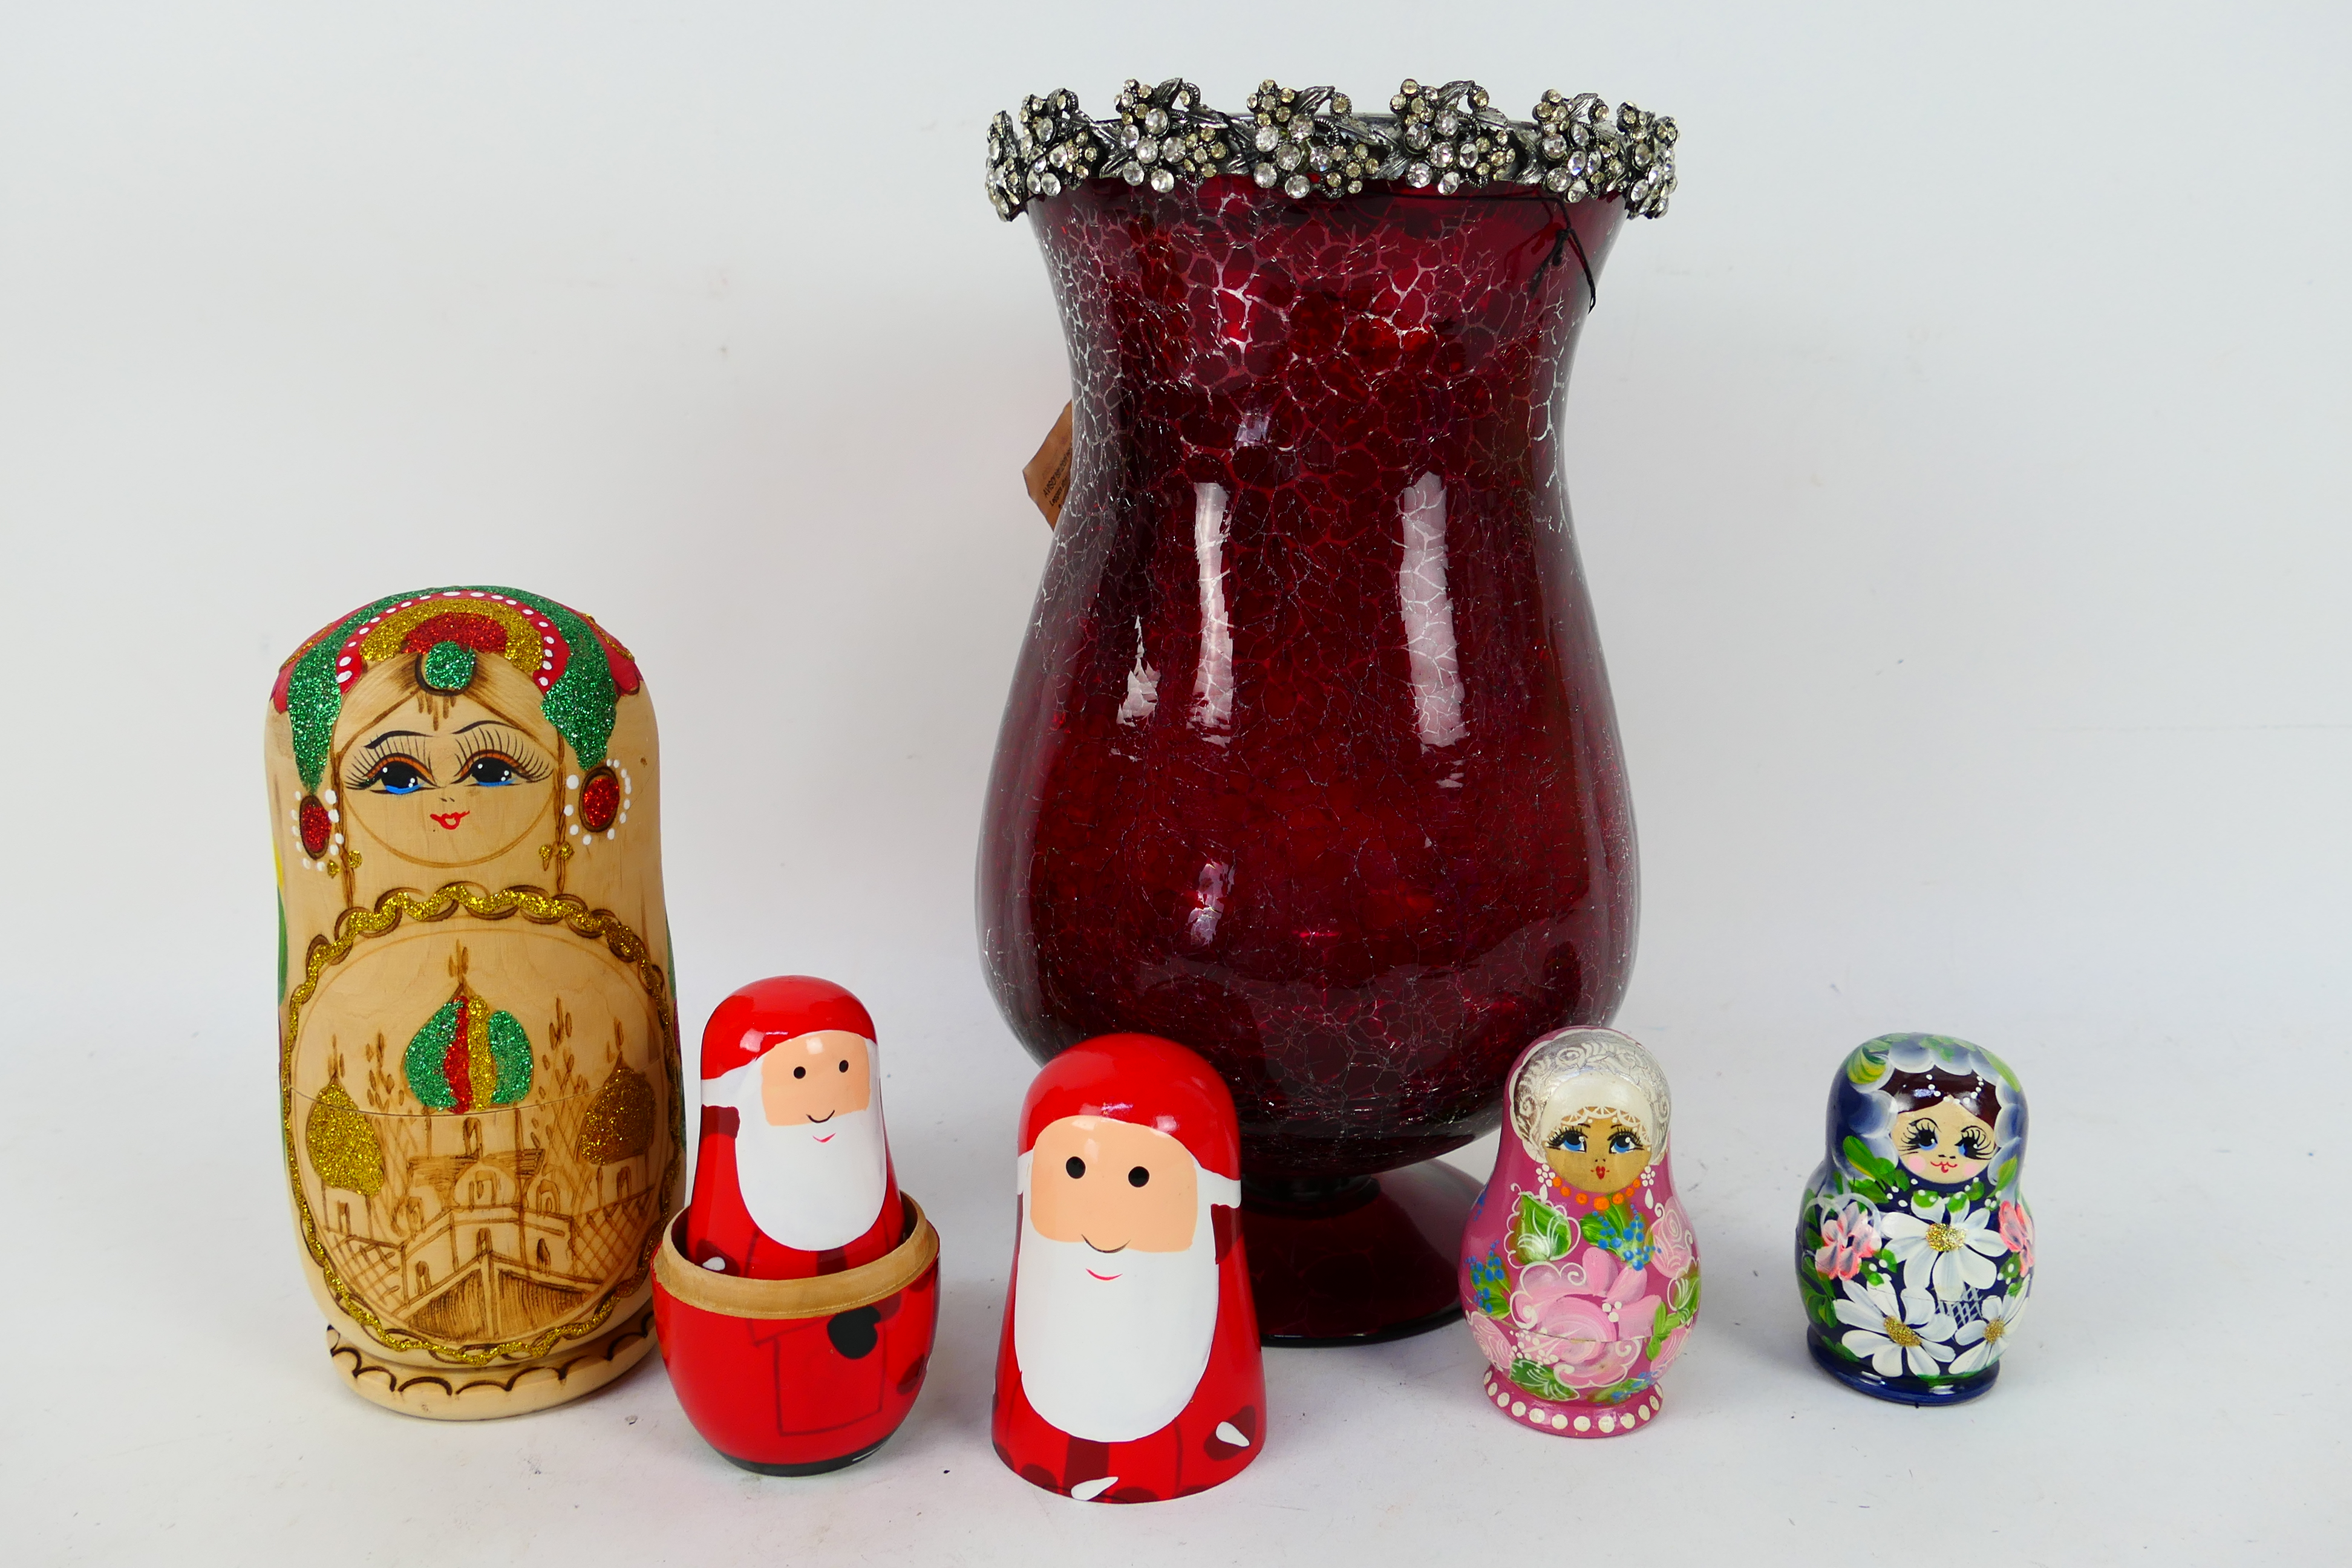 A decorative windlight candle holder, 30 cm (h) and four set of Russian matryoshka nesting dolls,